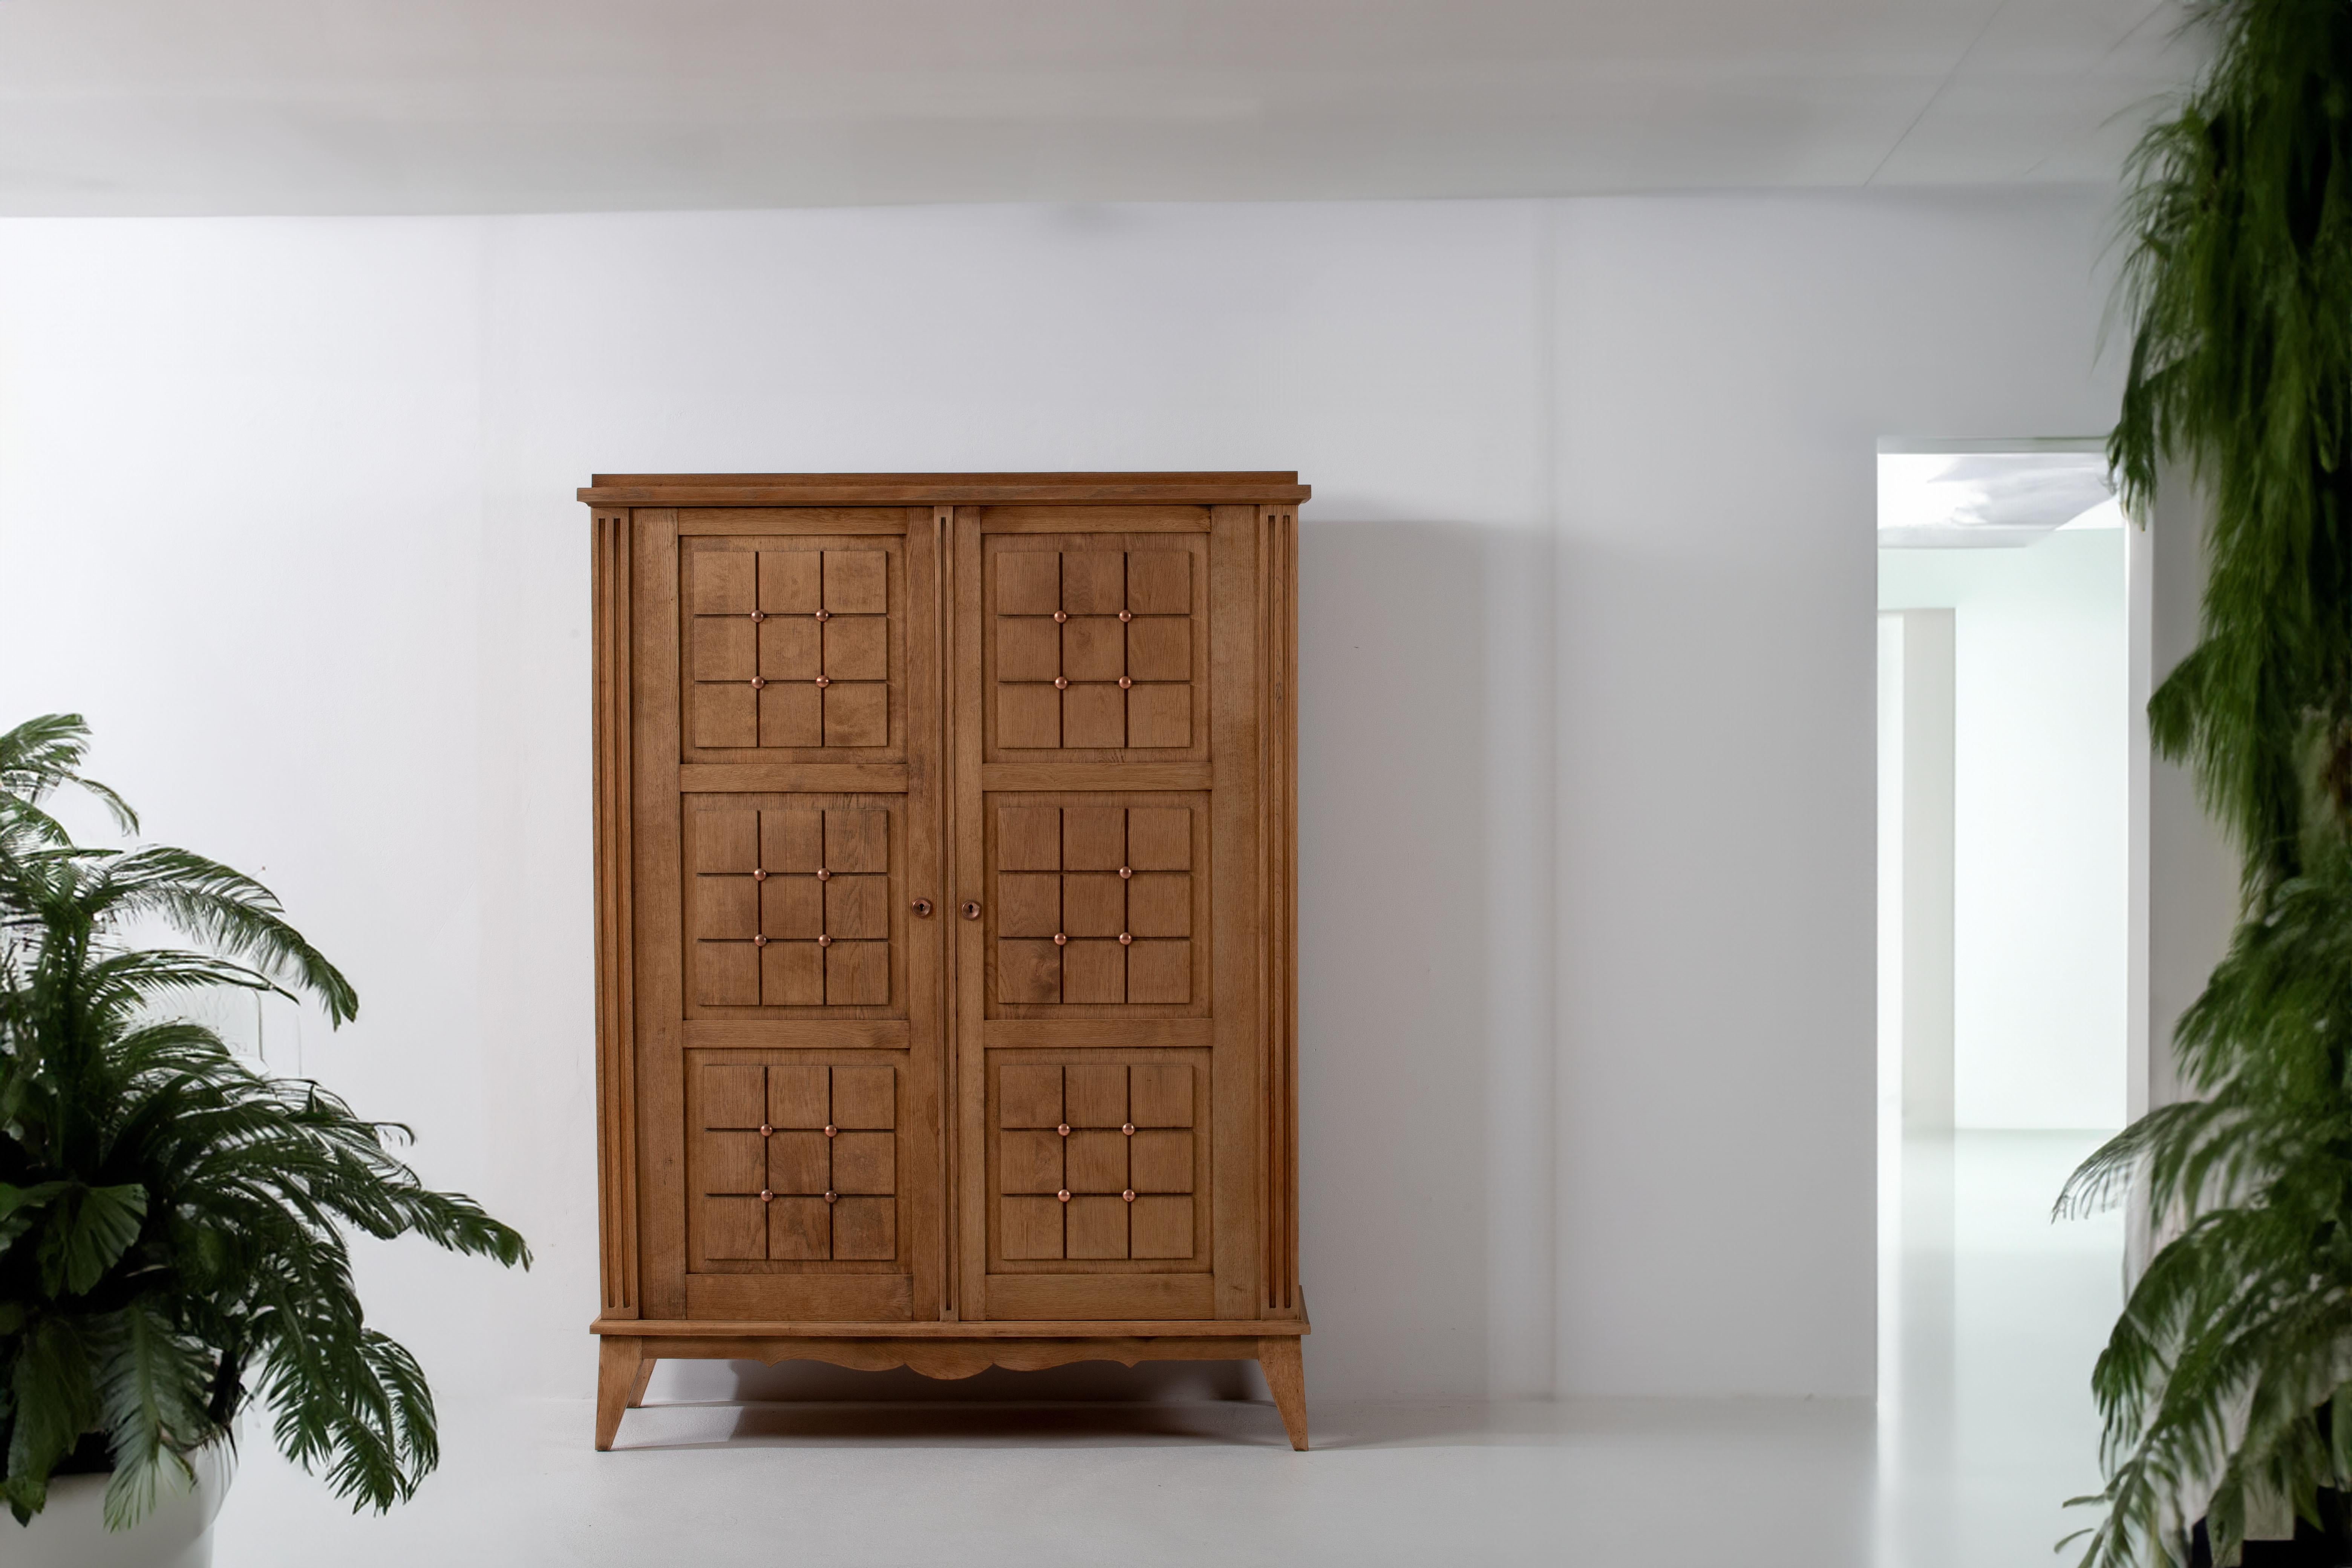 Introducing a captivating Solid Oak Wardrobe from the 1950s, this exceptional French piece showcases distinct square patterns on its doors, drawing inspiration from the bold aesthetics of brutalism. Crafted with meticulous attention to detail, the